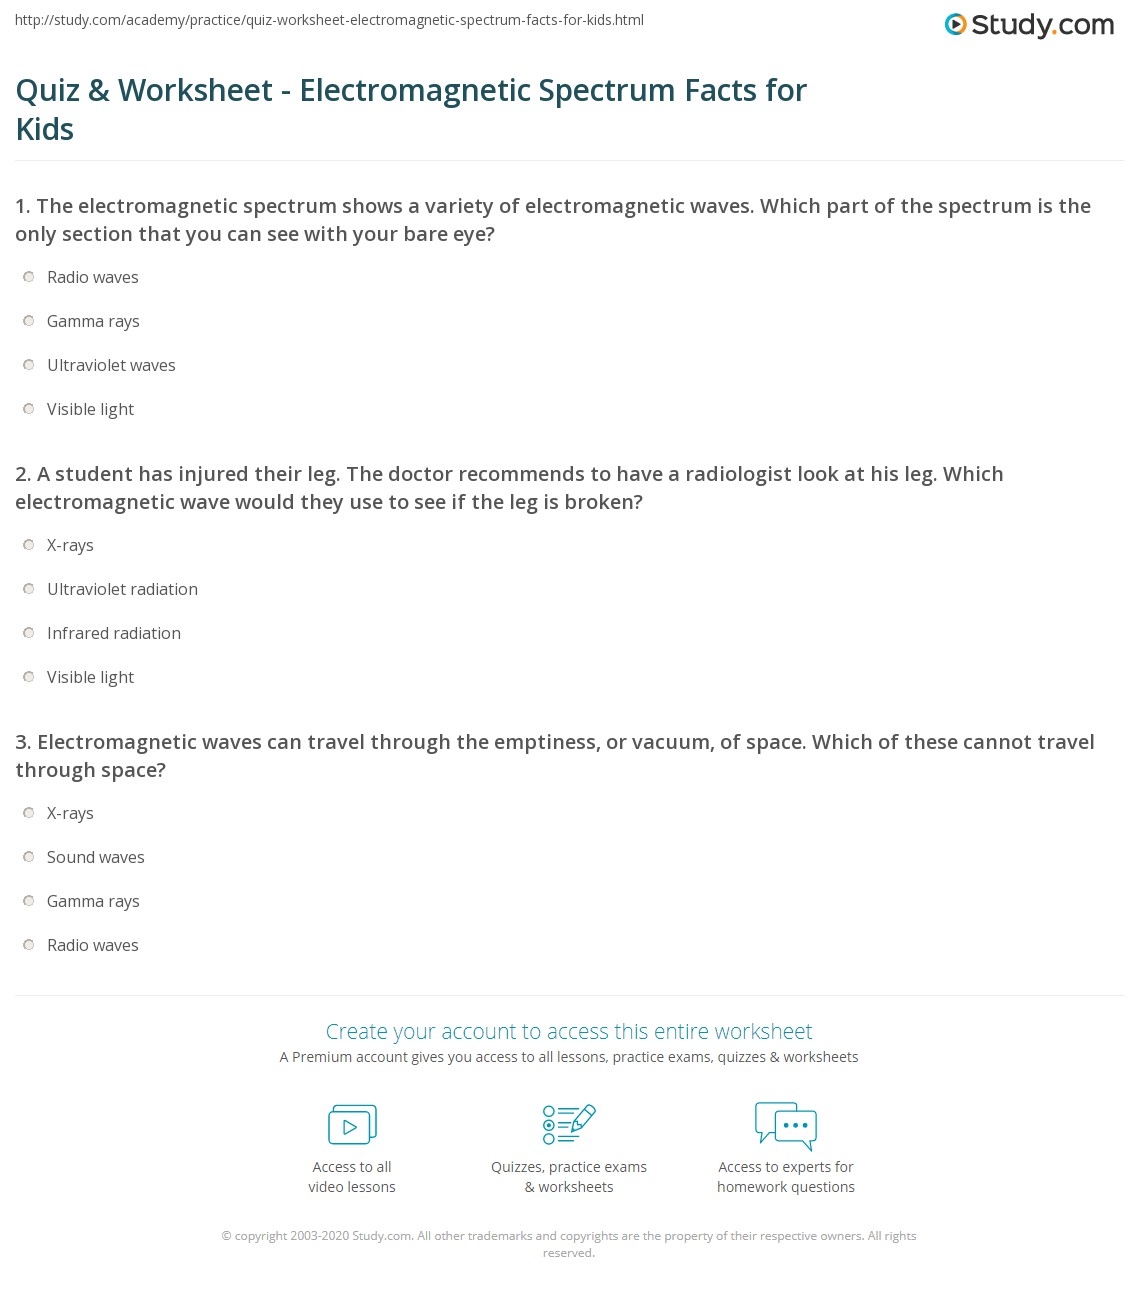 quiz-worksheet-electromagnetic-spectrum-facts-for-kids-study-math-worksheet-answers